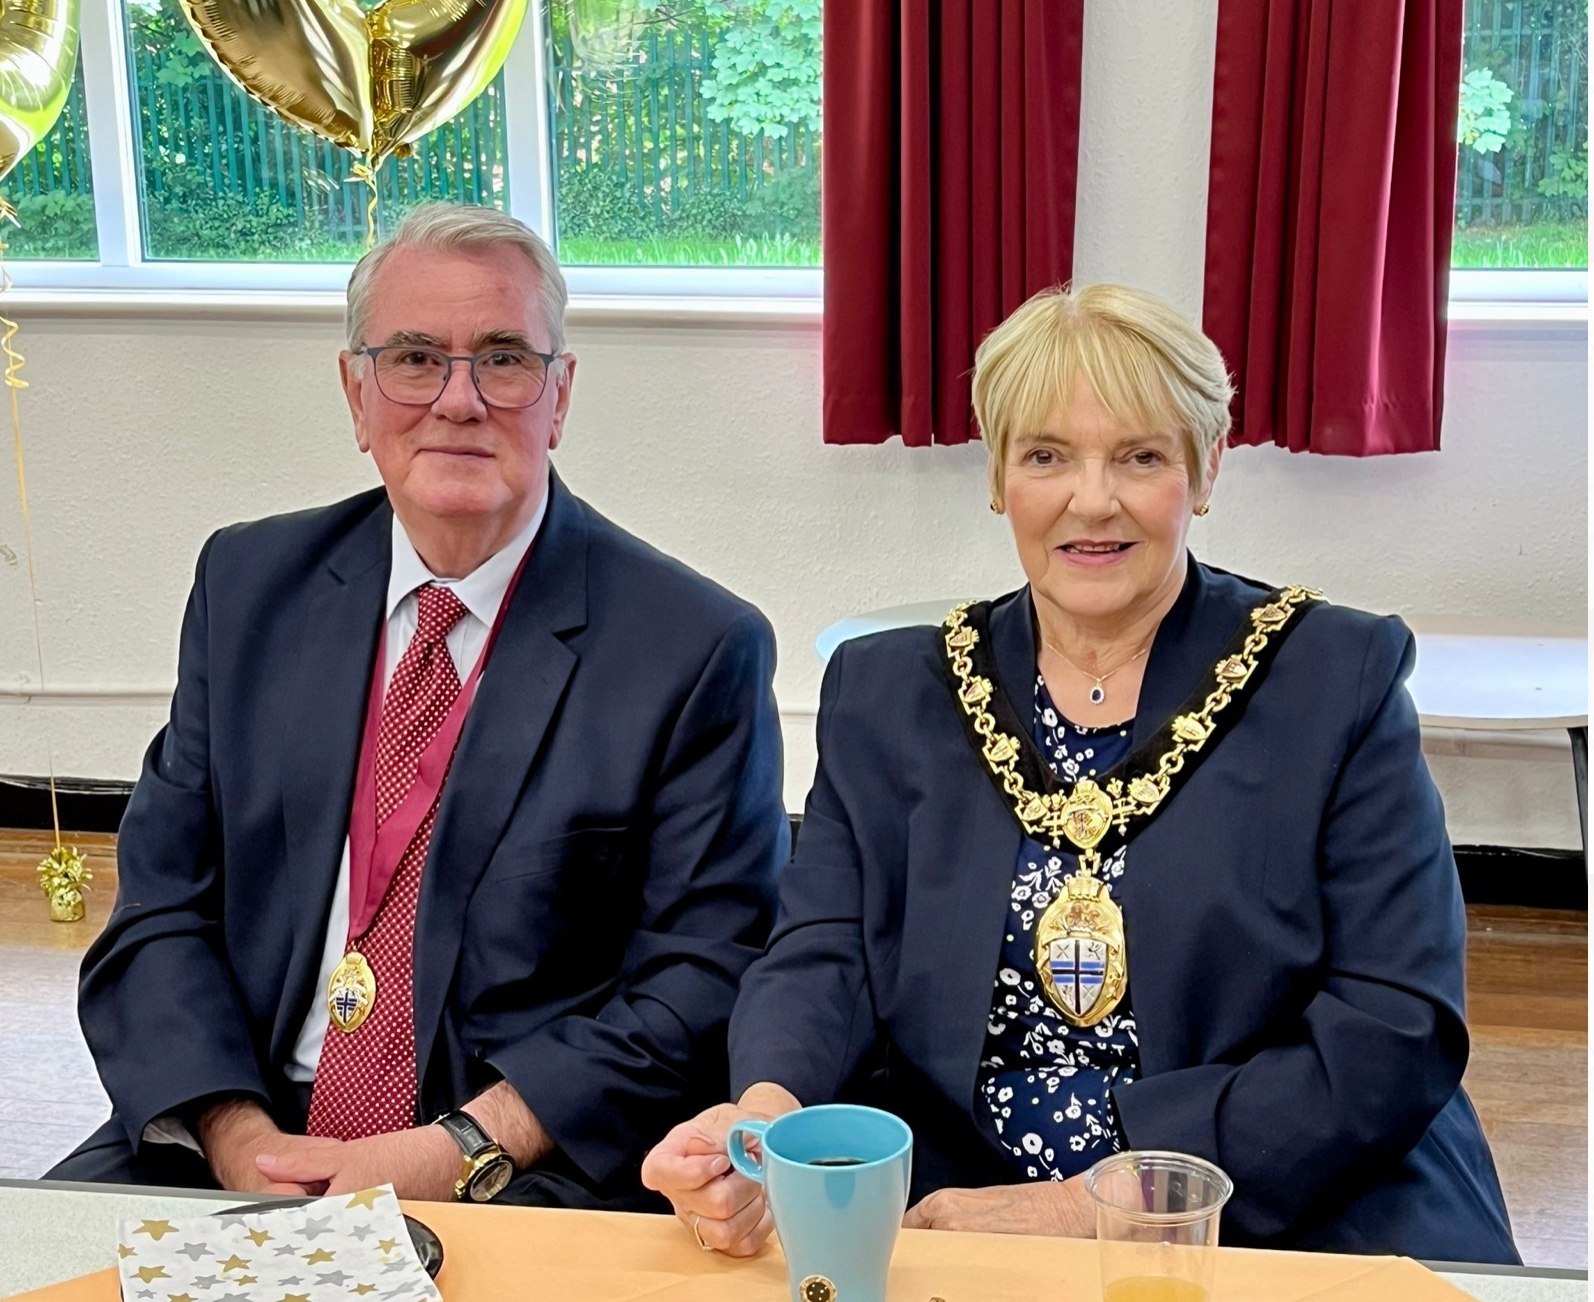 The mayor Cllr Jeanette Banks, with Cllr Dave Banks at the celebration